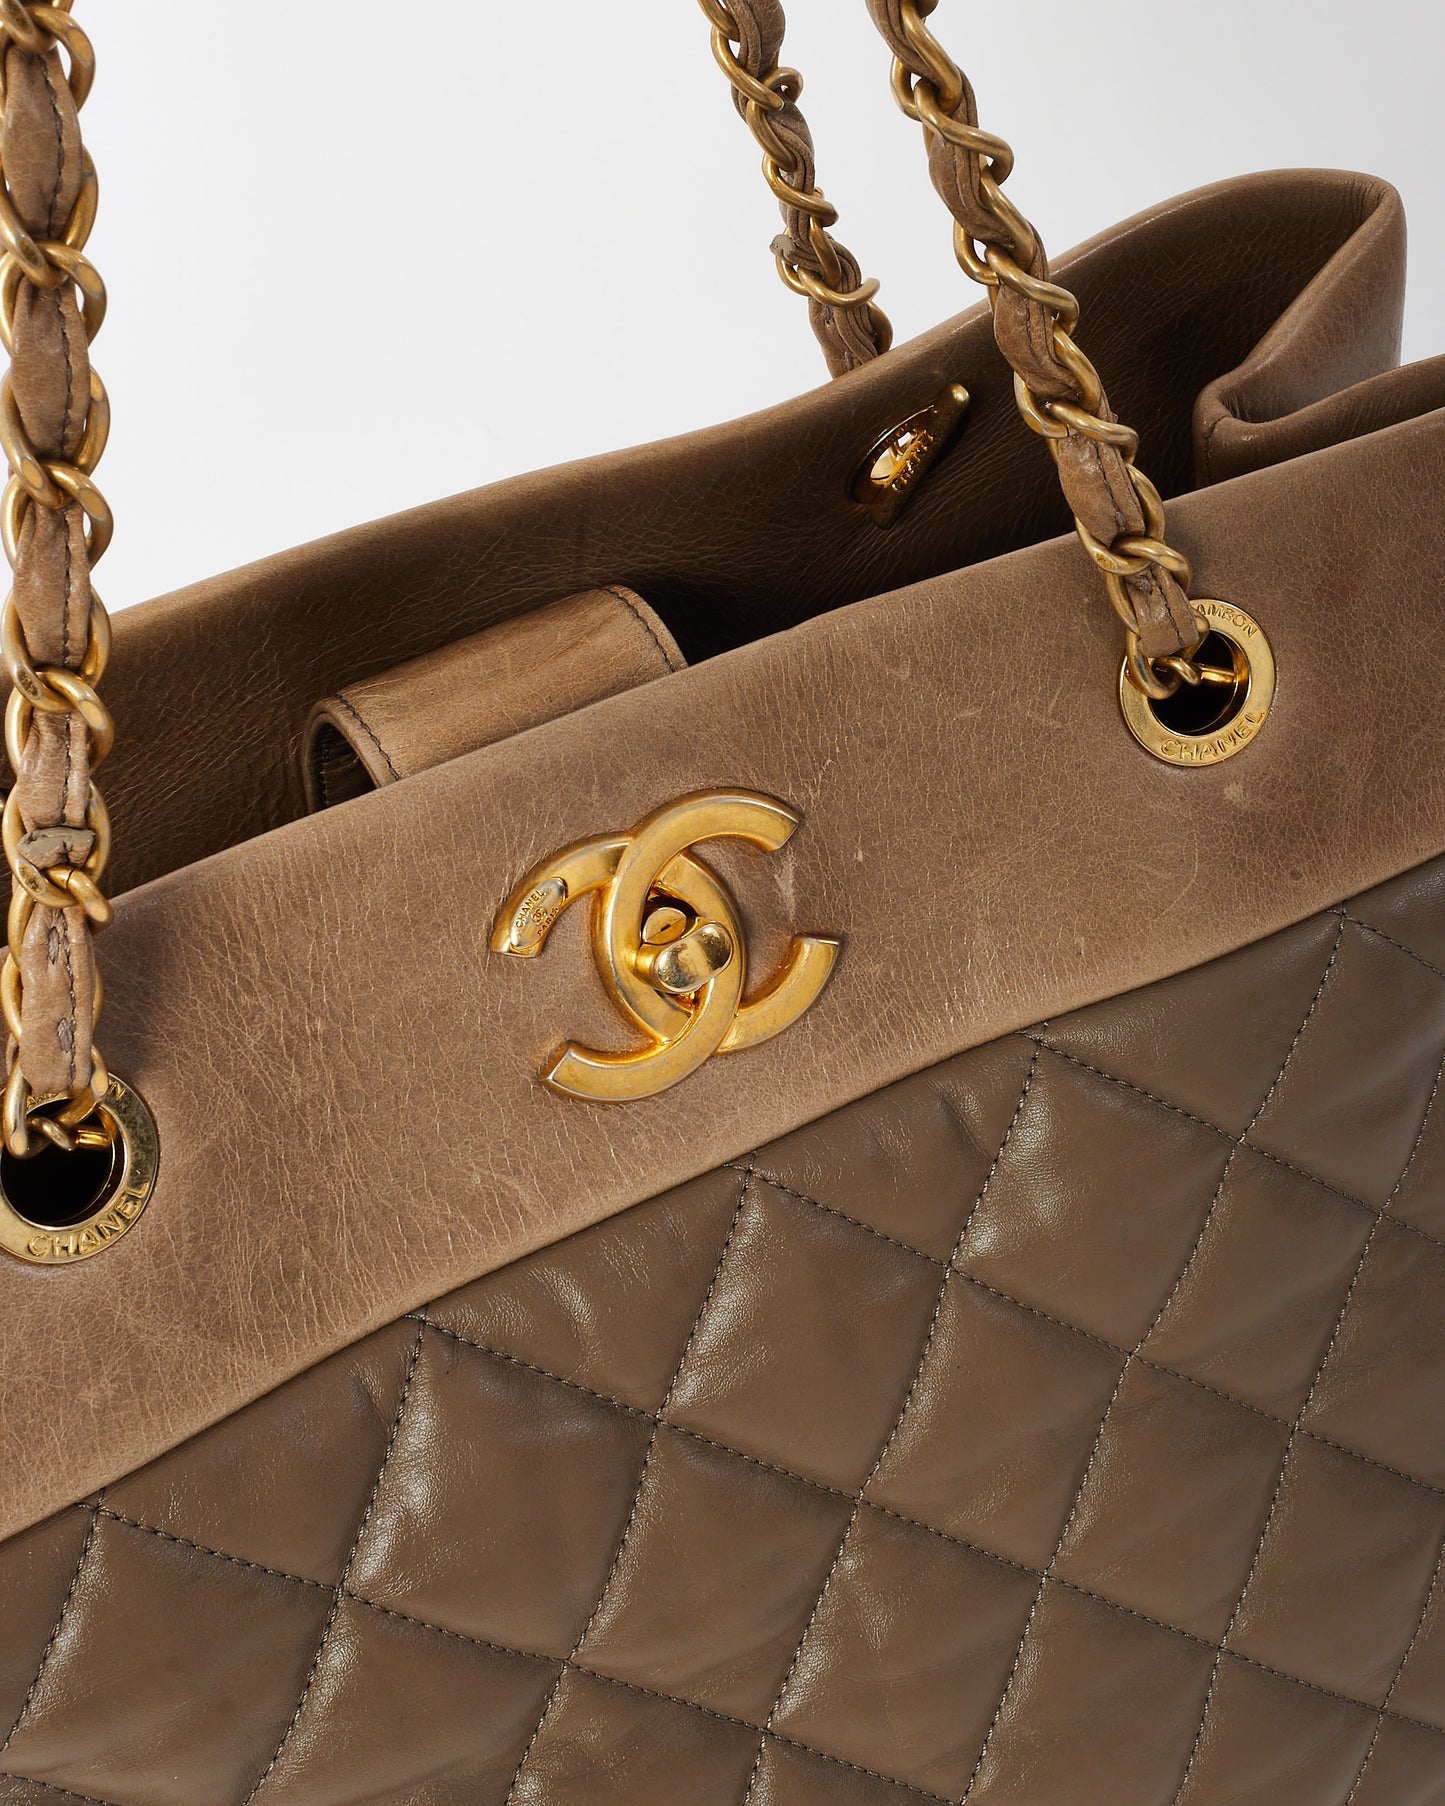 Chanel Brown Soft Quilted Leather Large Elegance Tote